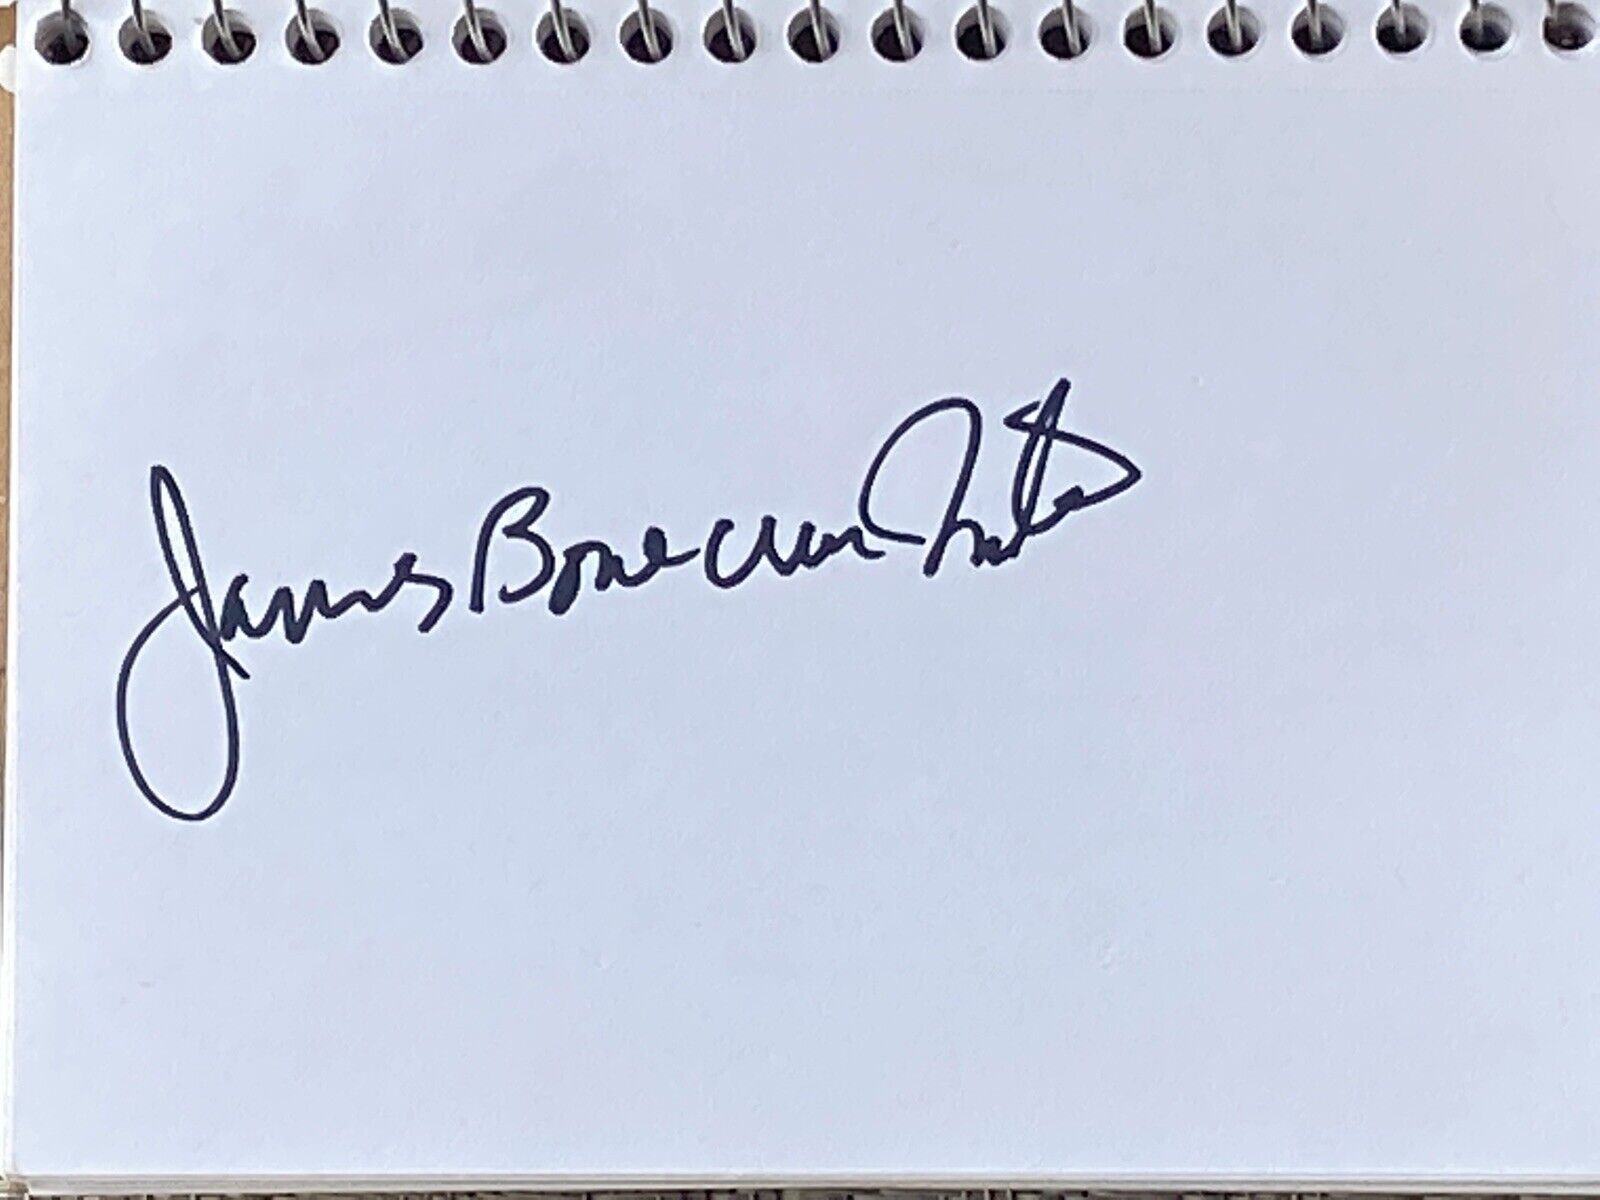 James ‘bonecrusher’ Smith Signed 4 X 6 Autographed Index Card Boxing Champion